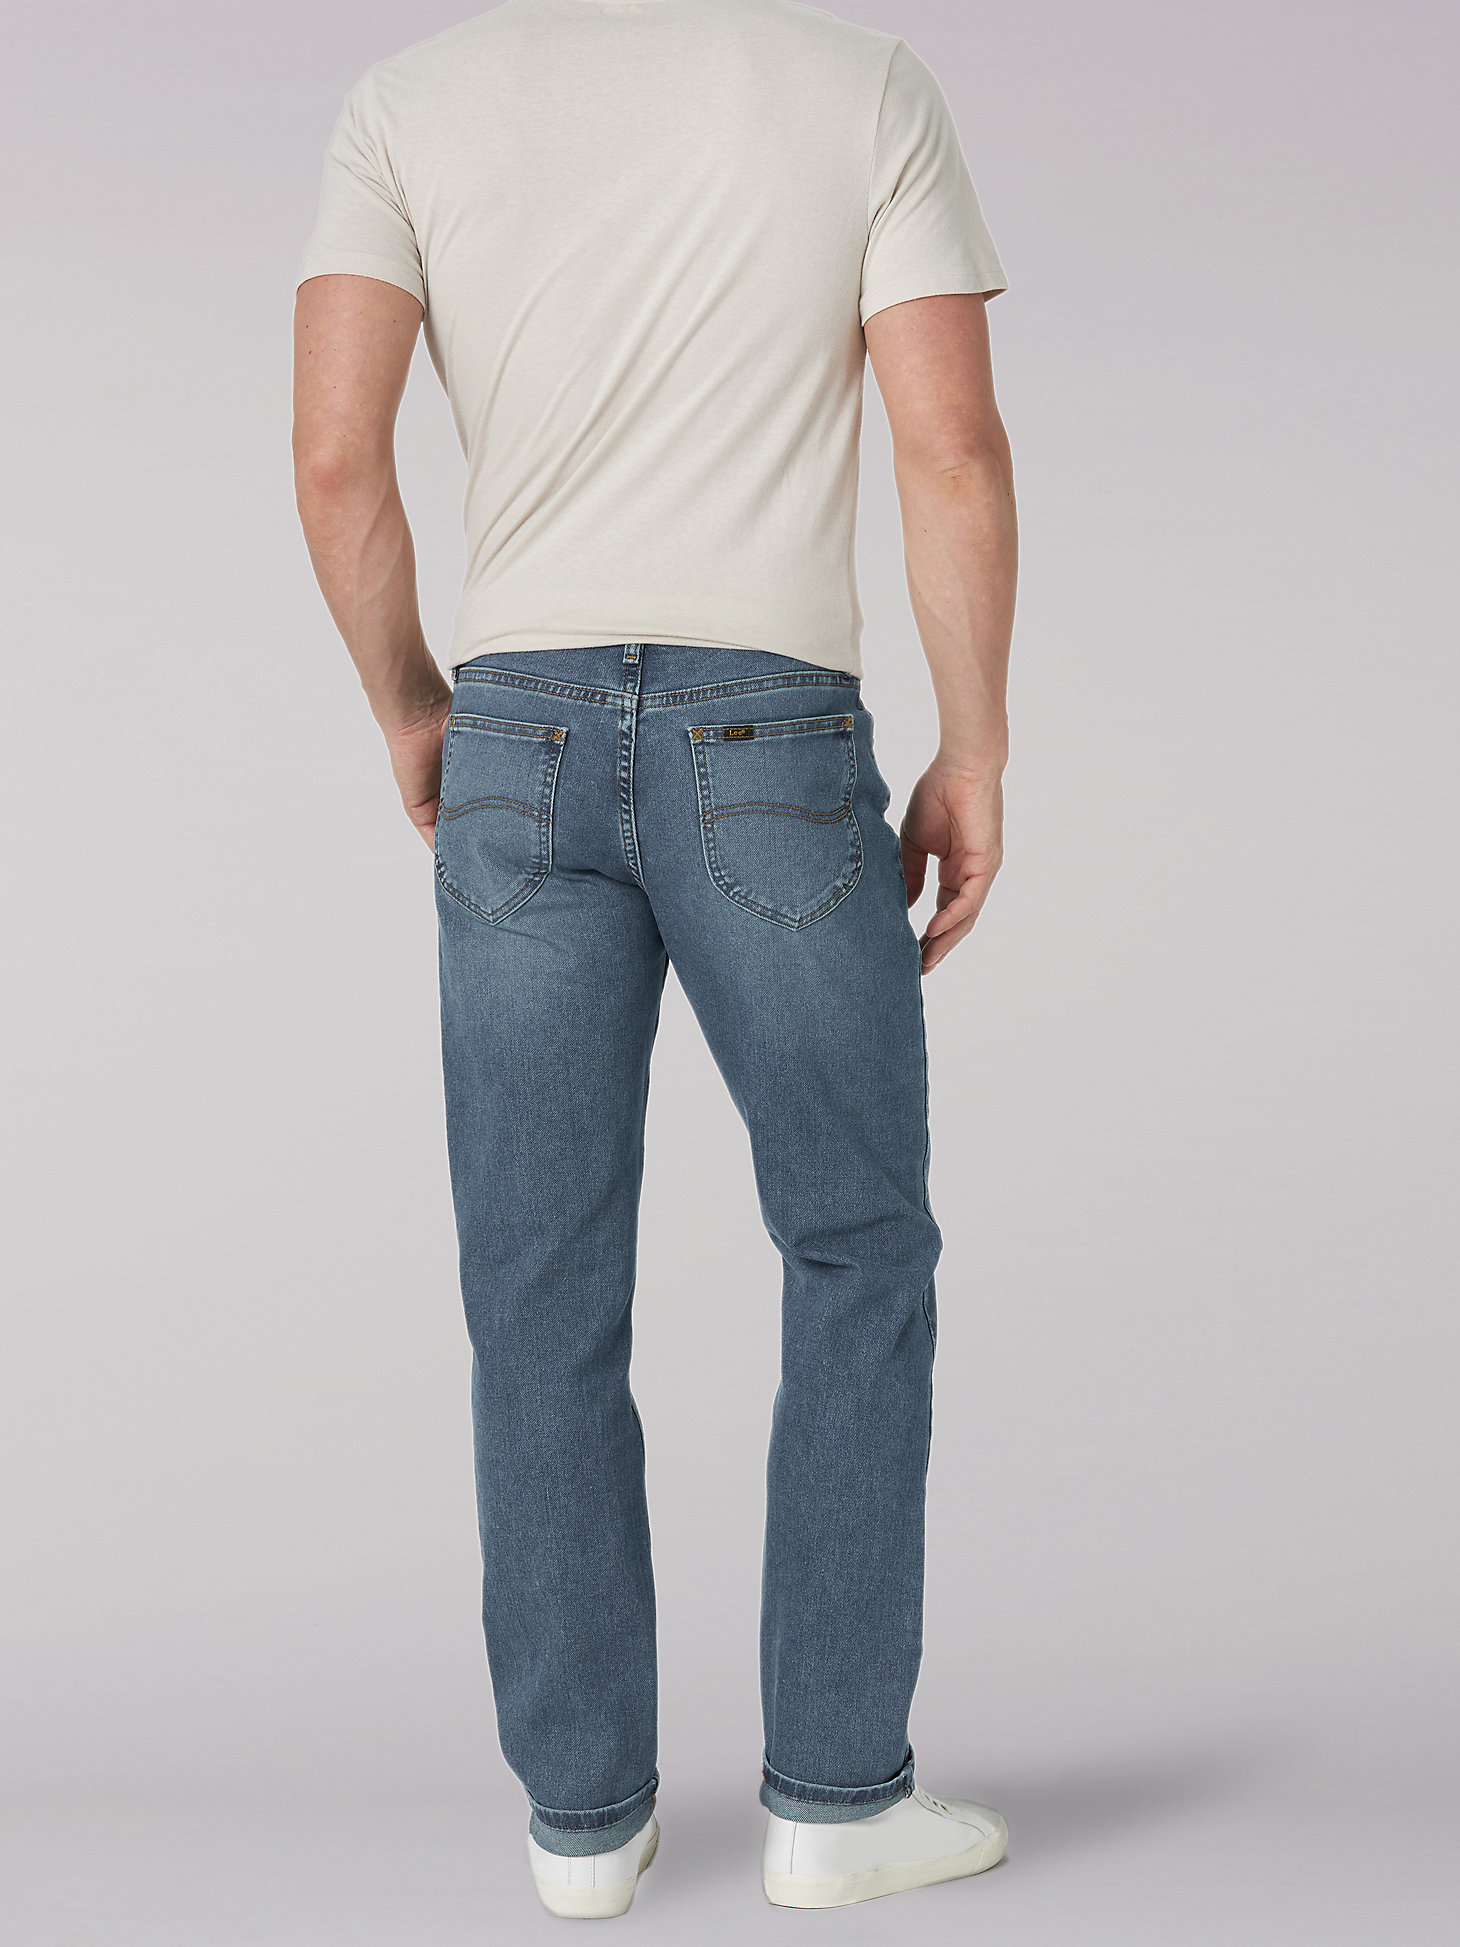 Men's Legendary Athletic Tapered Jean in Cruise alternative view 1